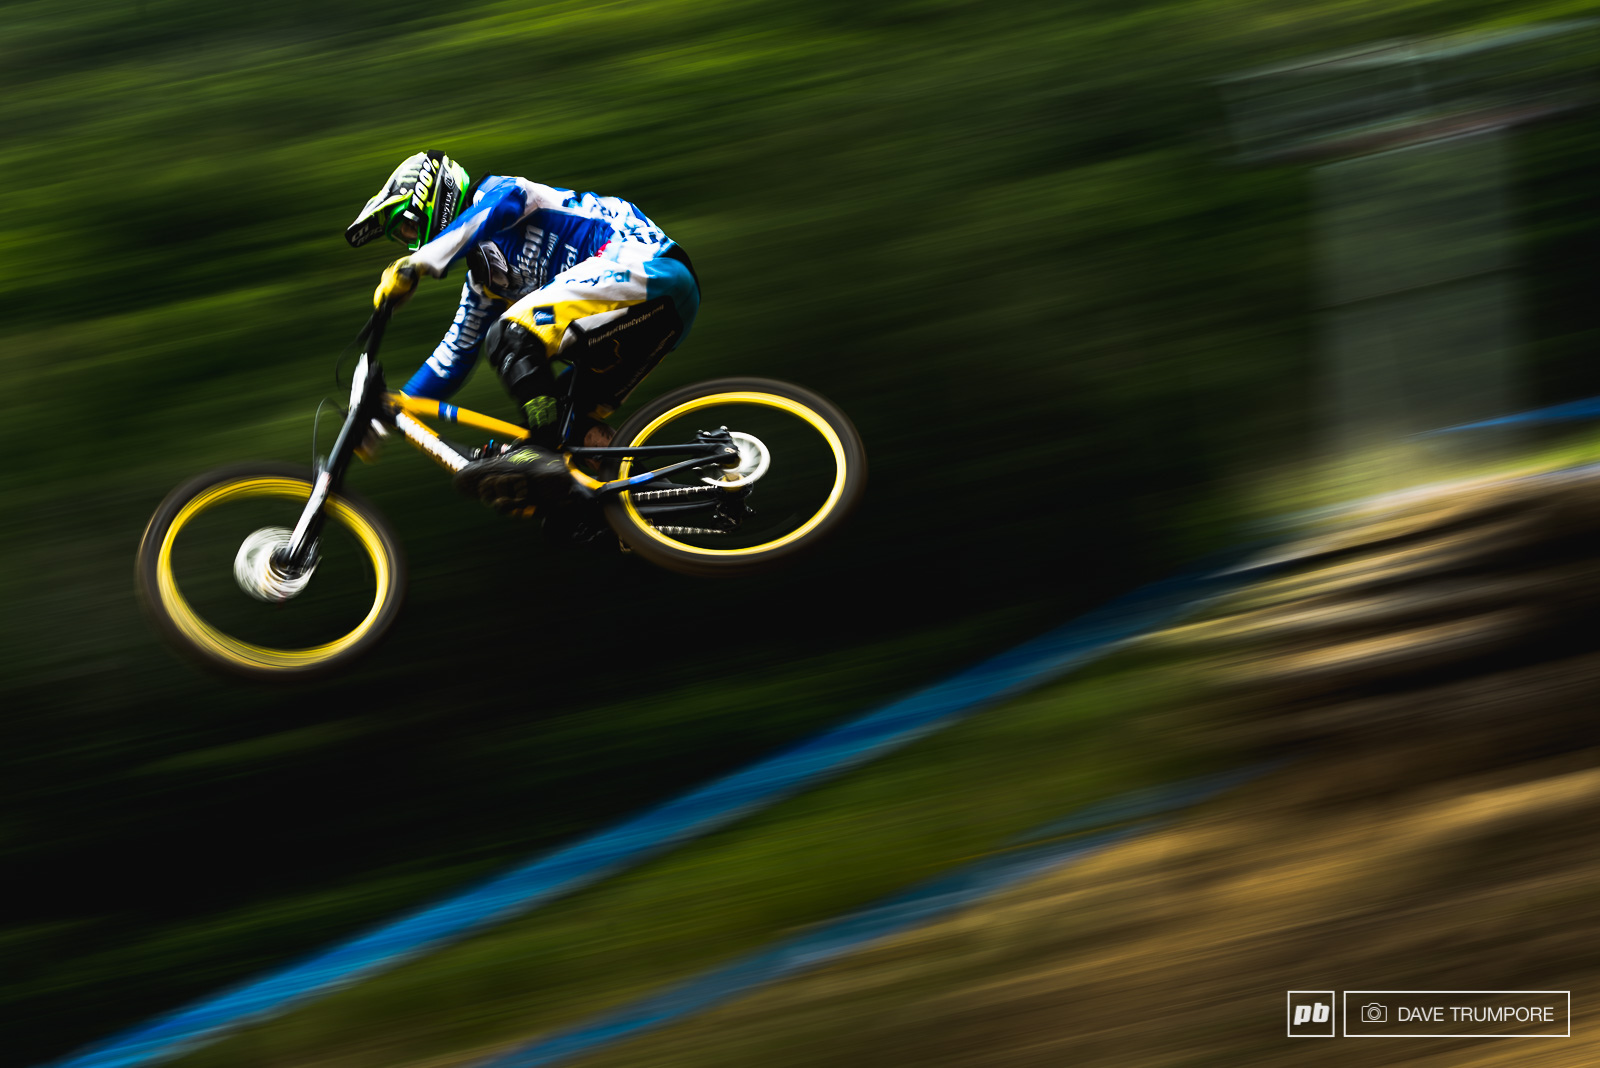 Sam Hill is still recovering from injury  but never count him out on the slopes of Mont St Anne